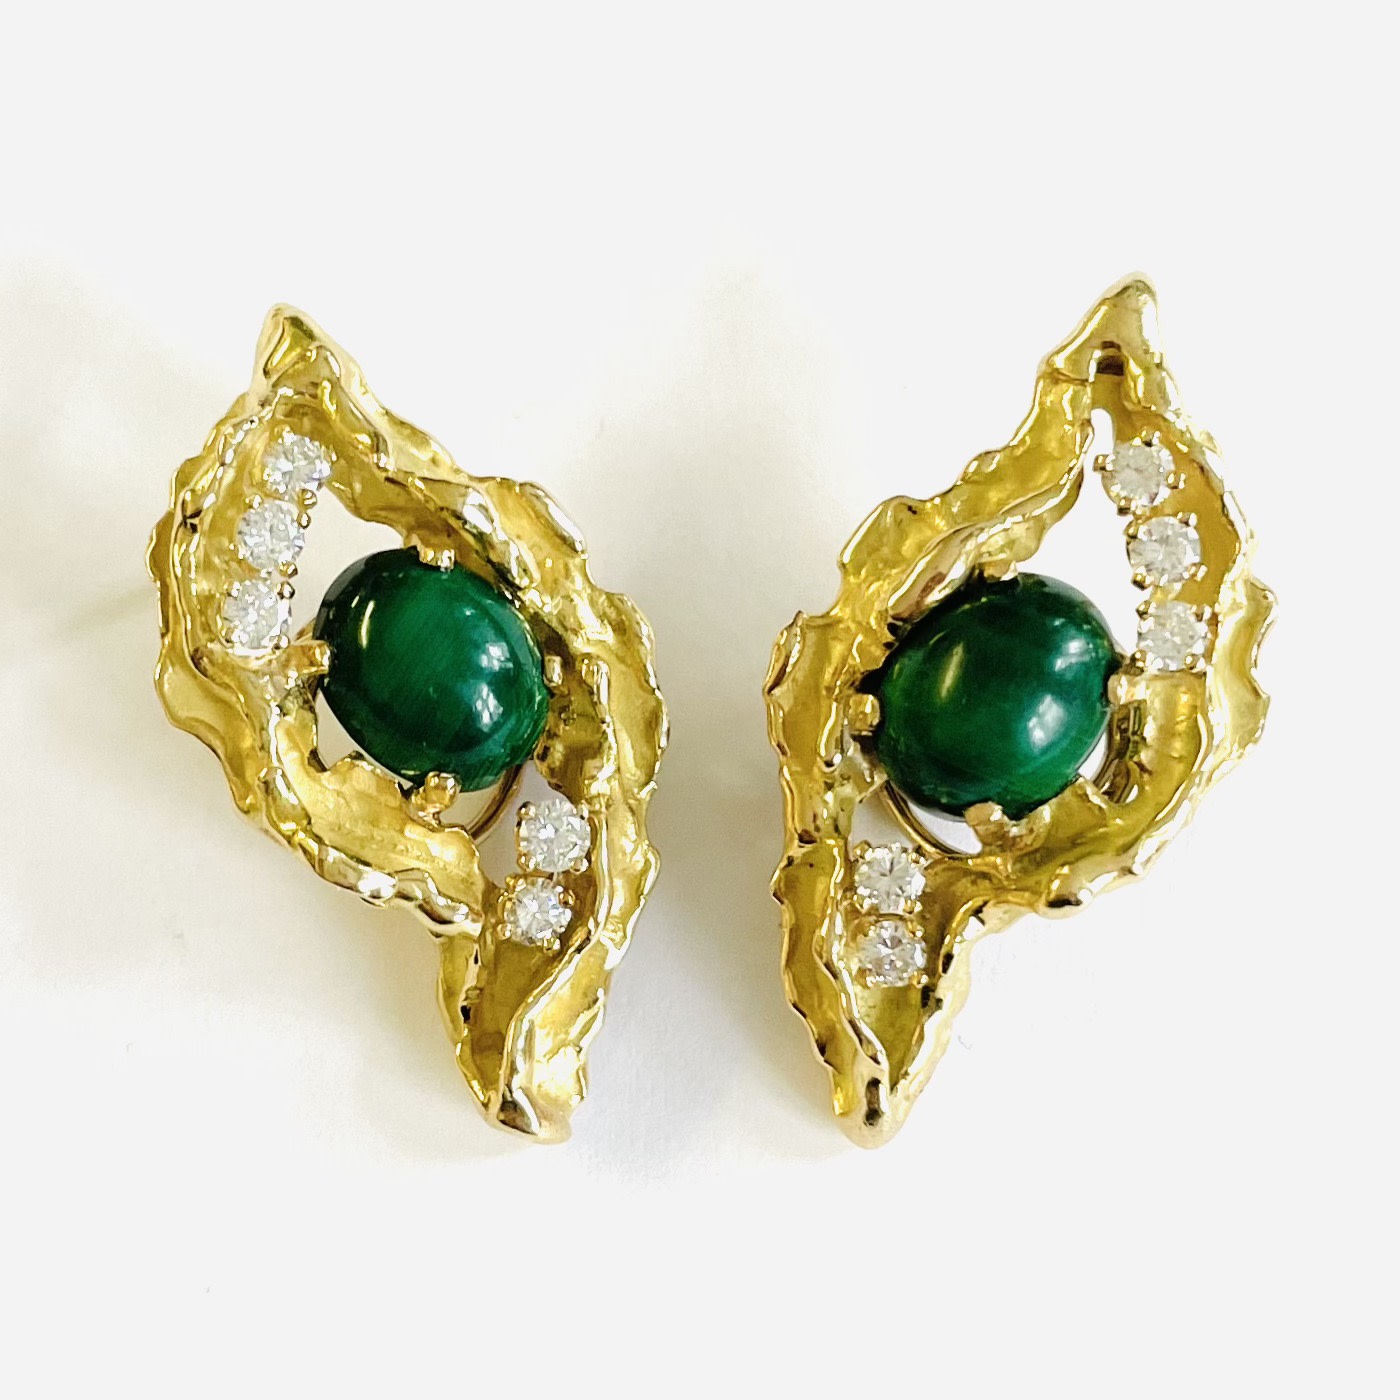 Chaumet French 1960s 18KT Yellow Gold Malachite & Diamond Earrings front